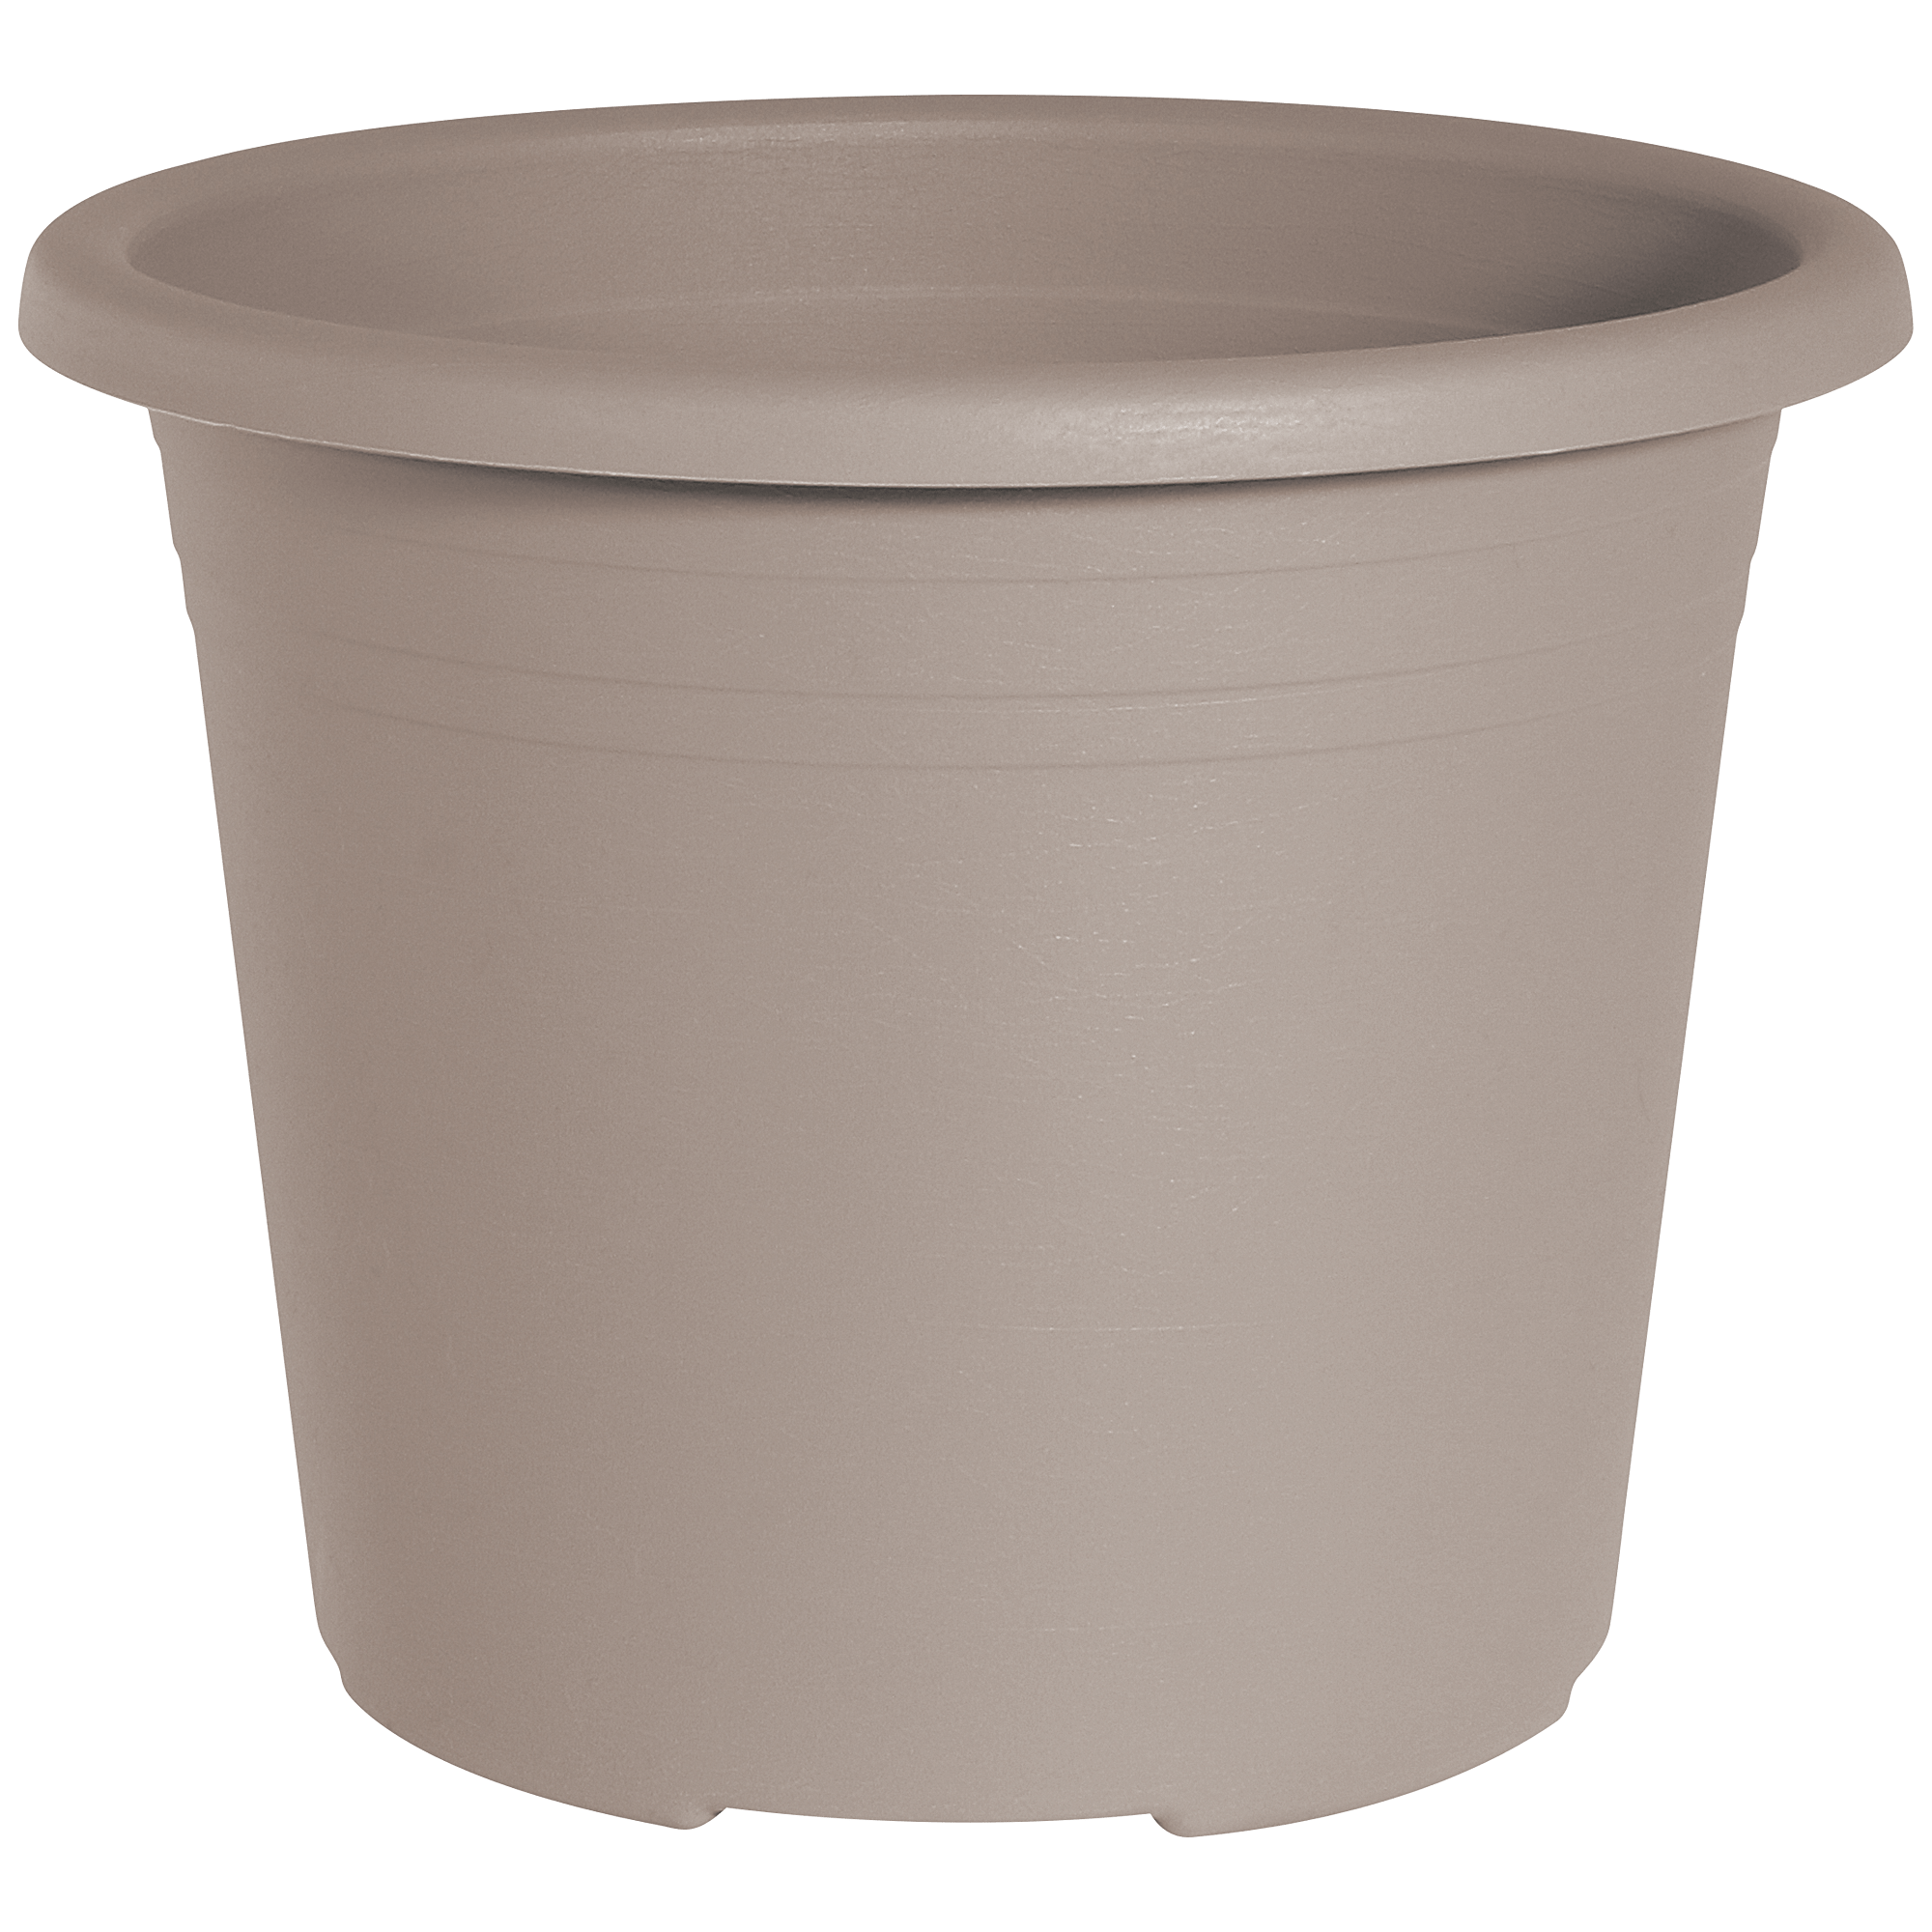 Topf 'Cylindro' taupe Ø 25 cm, 5,5 Liter + product picture